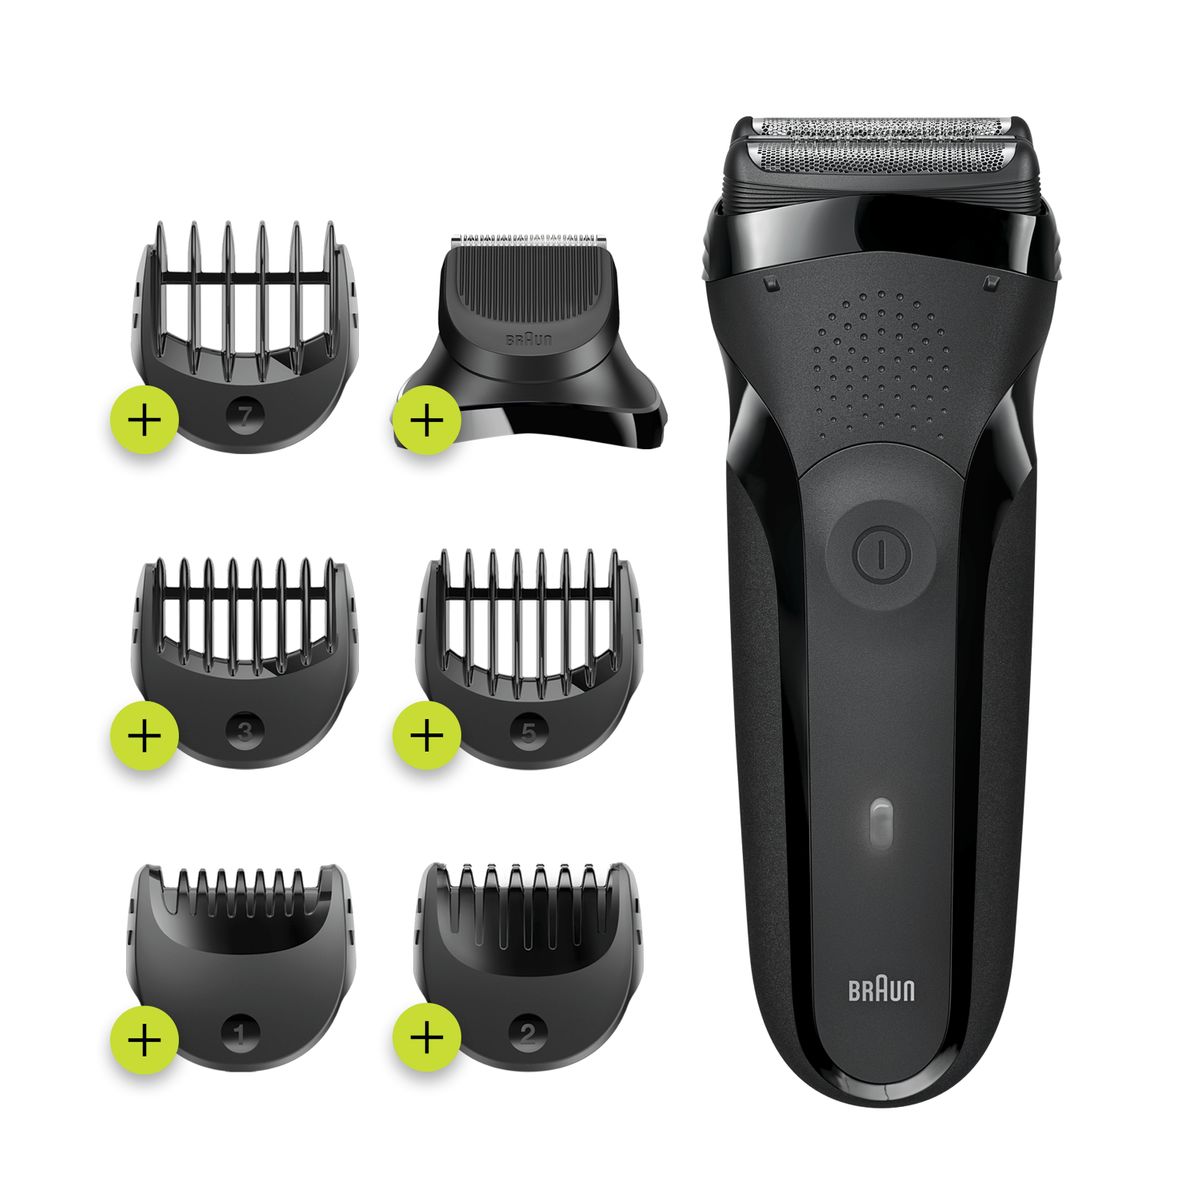 Braun Series 3 shaver men, 3-in-1 electric shaver, beard trimmer with 5 comb attachments, rechargeable and cordless electric shaver, 30 min run time, 300BT, black 300BT Shaver